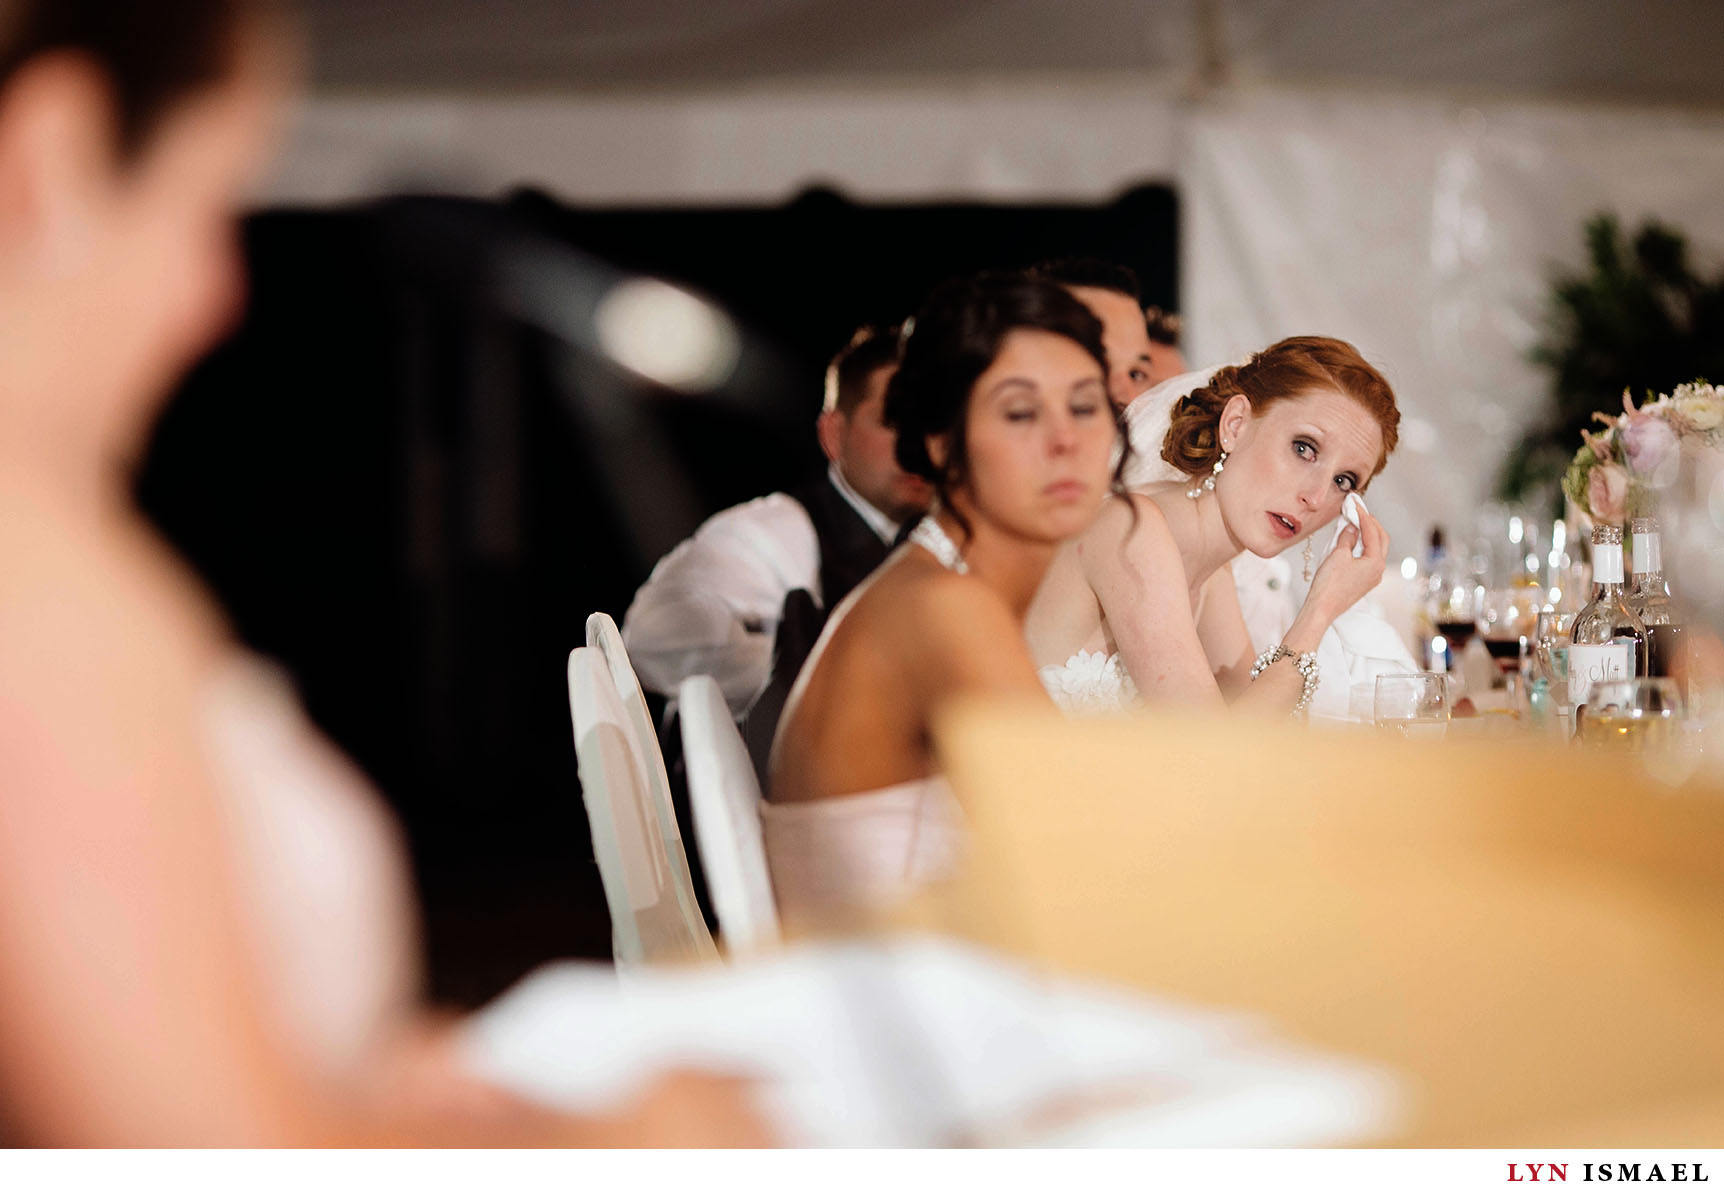 Redhead bride tears up listening to her Maid of Honor's speech.